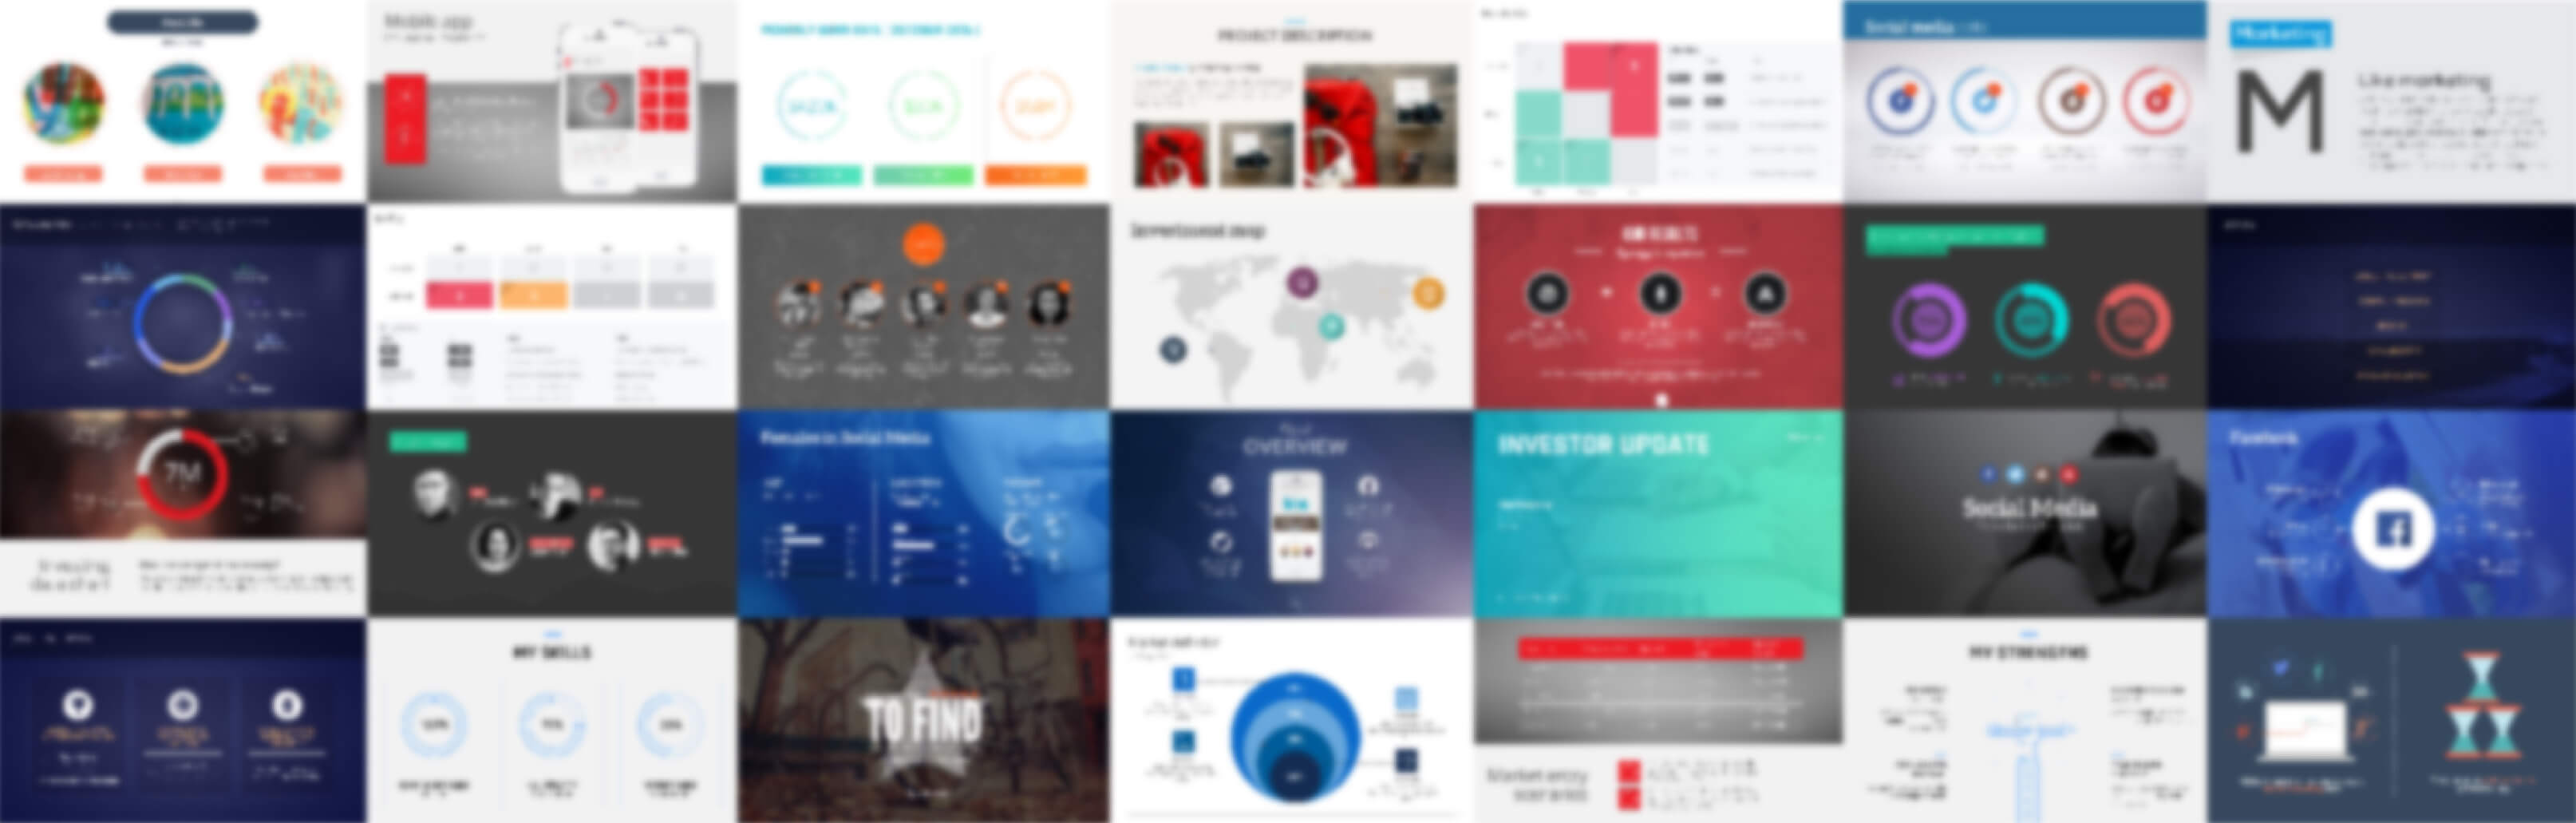 The 22 Best Powerpoint Templates For 2019 | Improve Presentation Within How To Design A Powerpoint Template